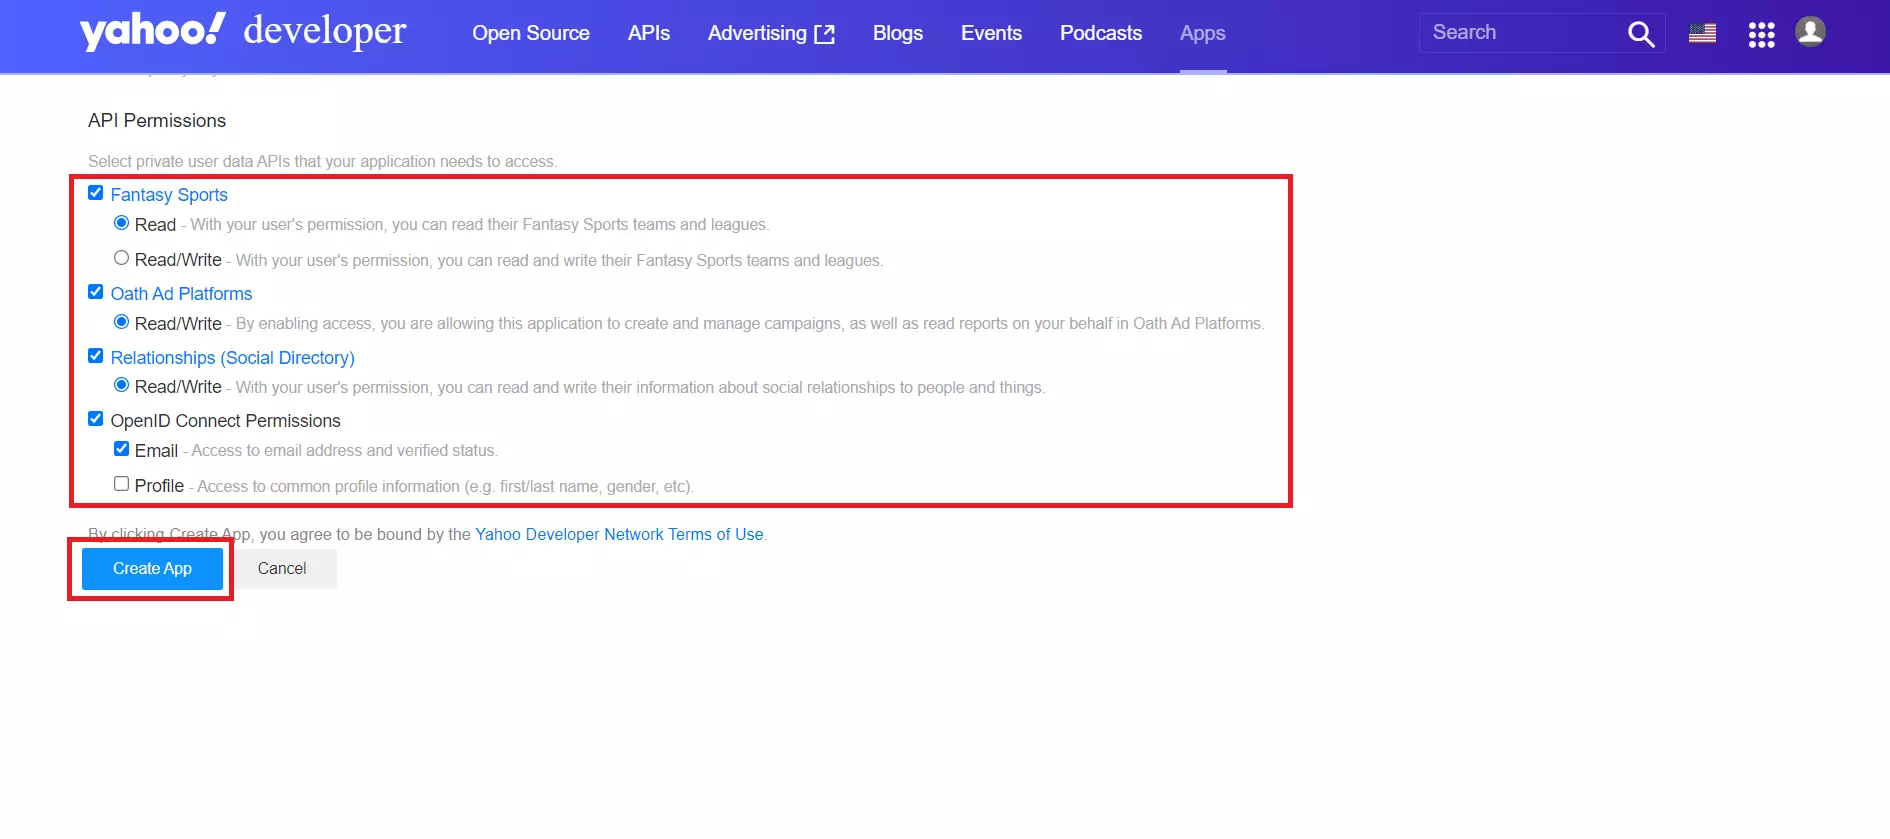 enable all API permissions to enable yahoo